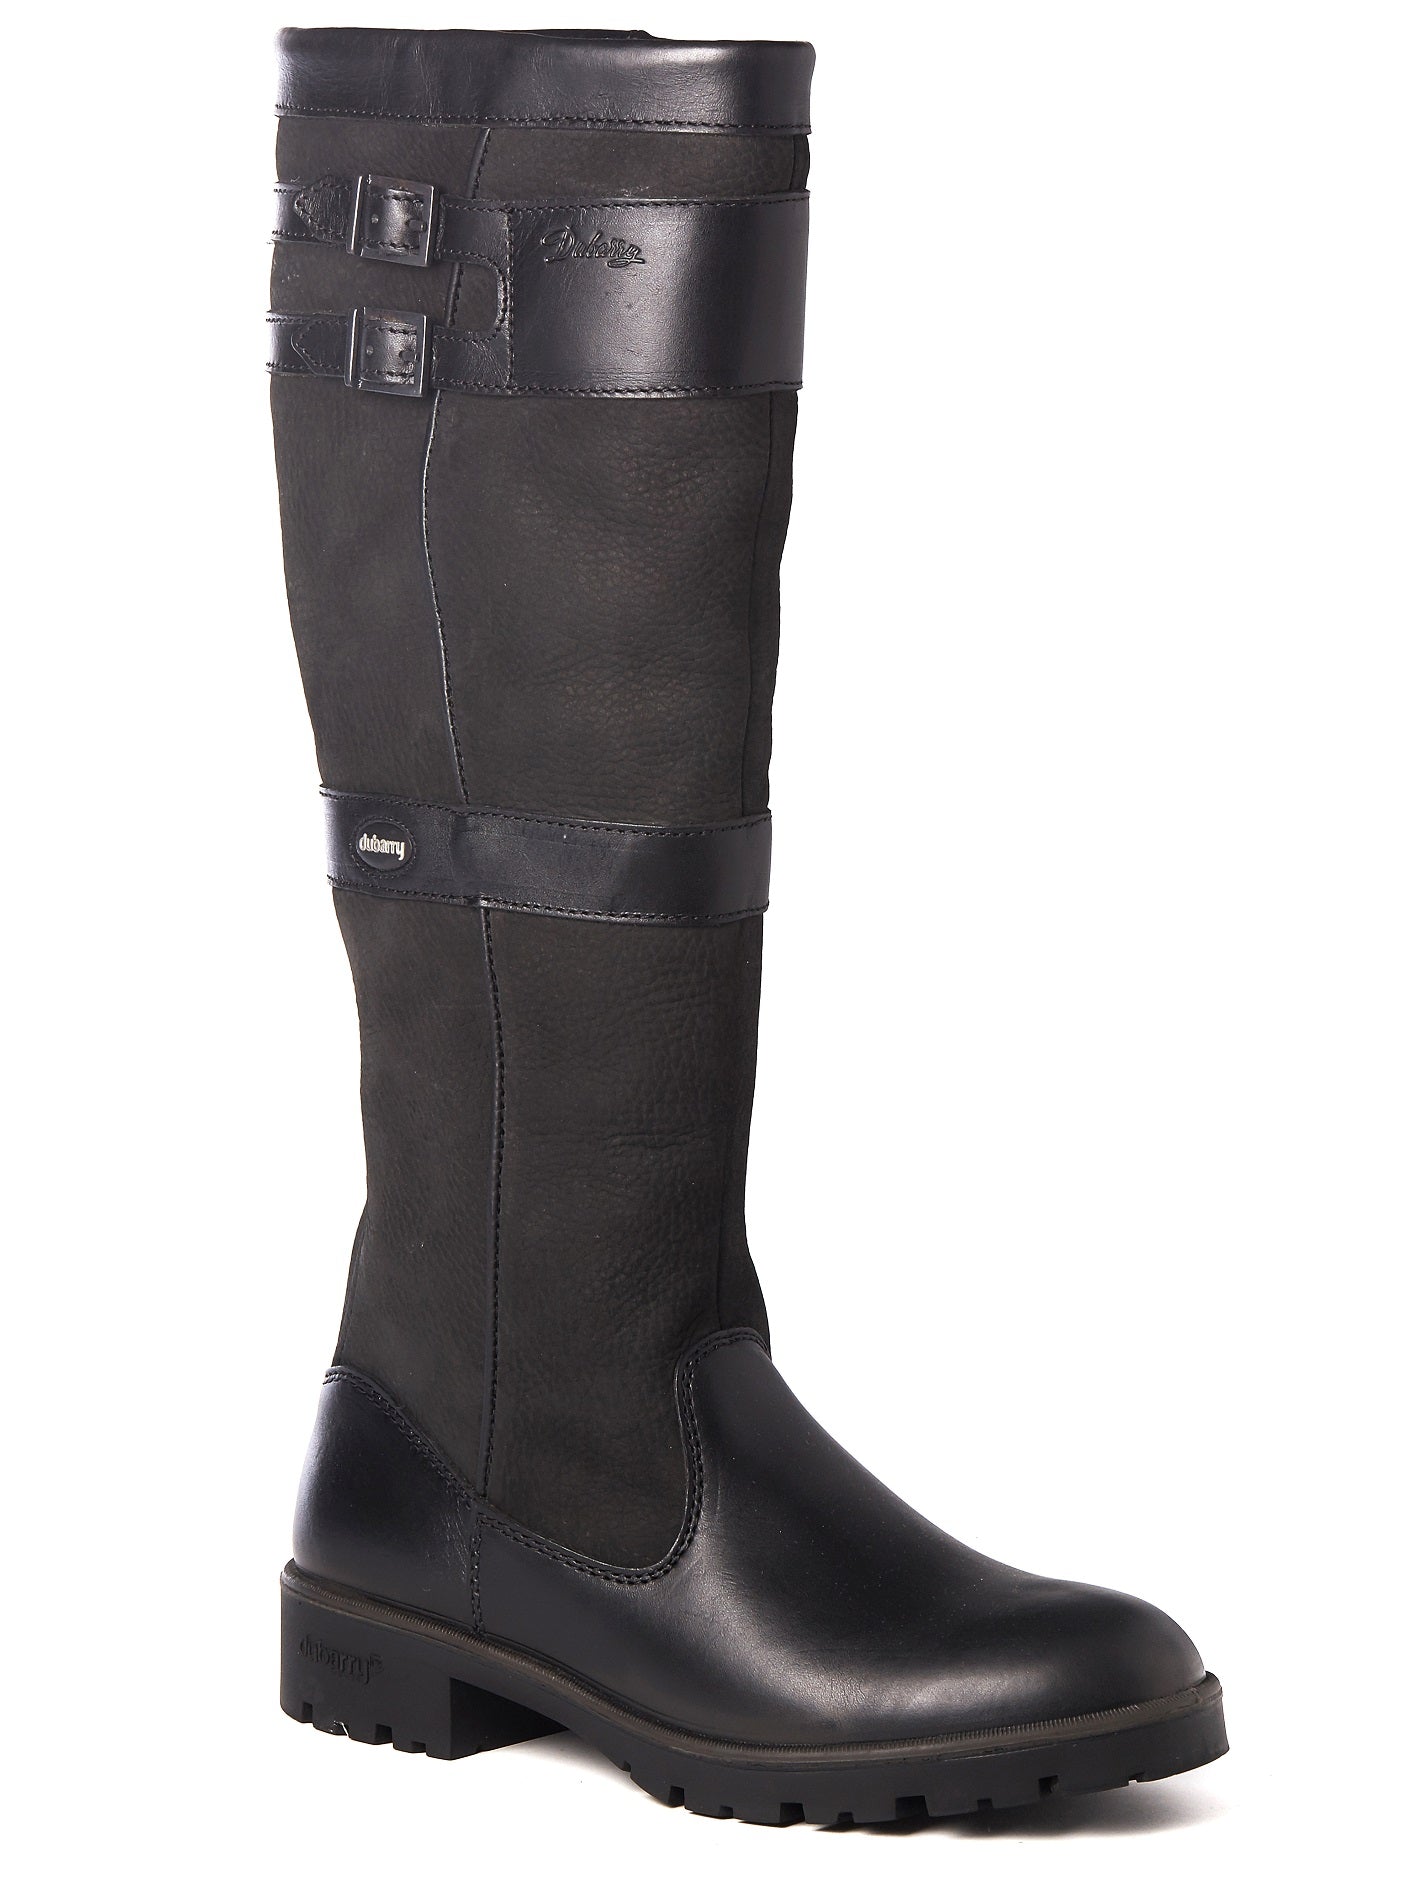 DUBARRY Longford Boots Ladies Waterproof Leather - Black – A Farley Country Attire